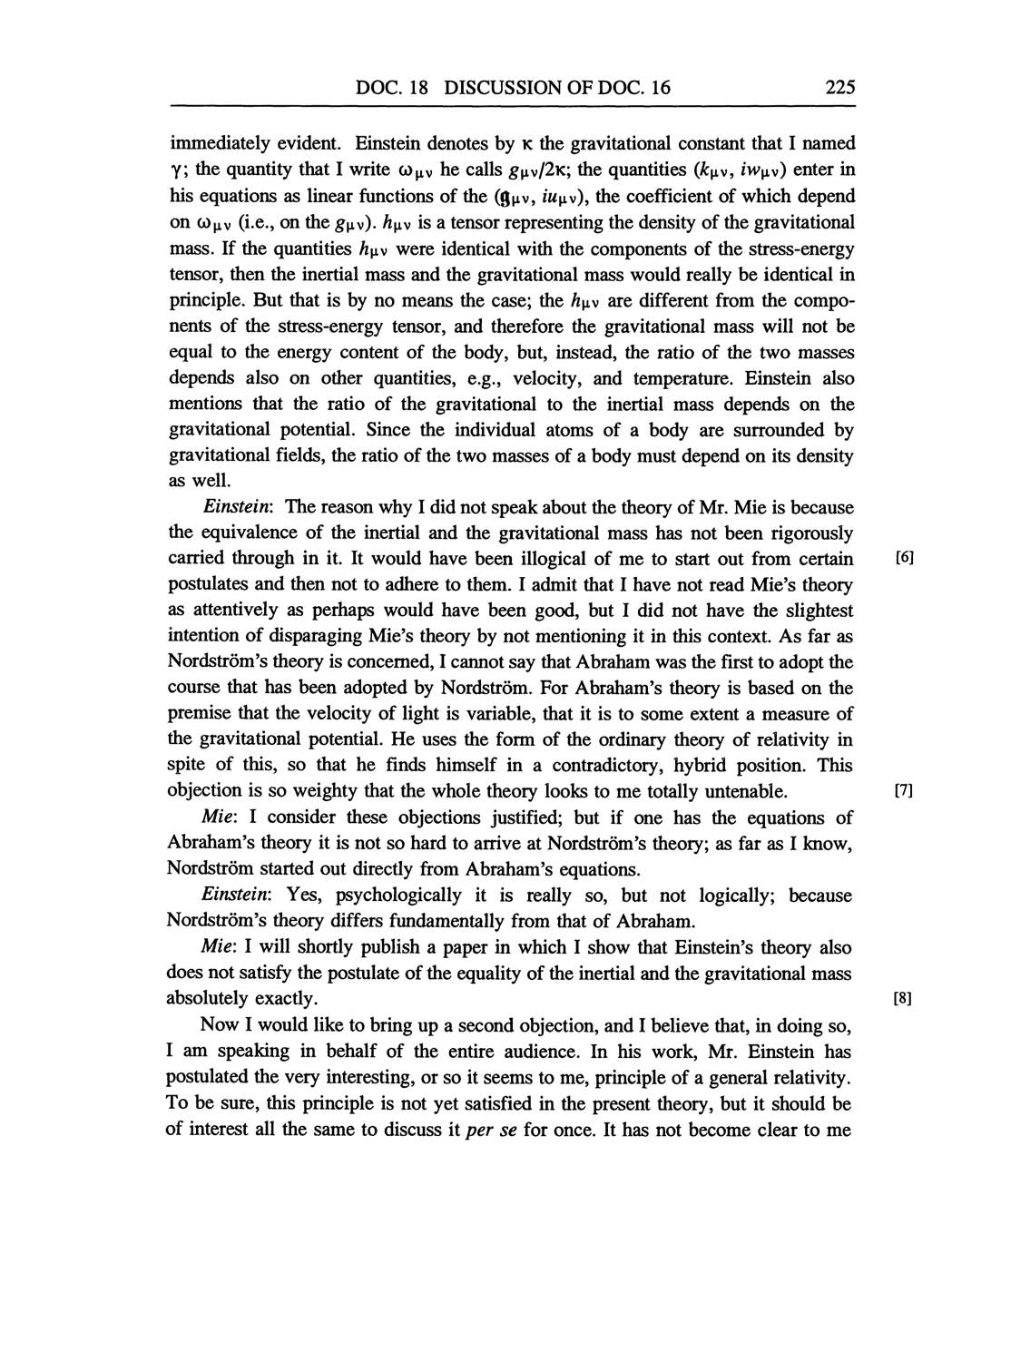 Volume 4: The Swiss Years: Writings 1912-1914 (English translation supplement) page 225